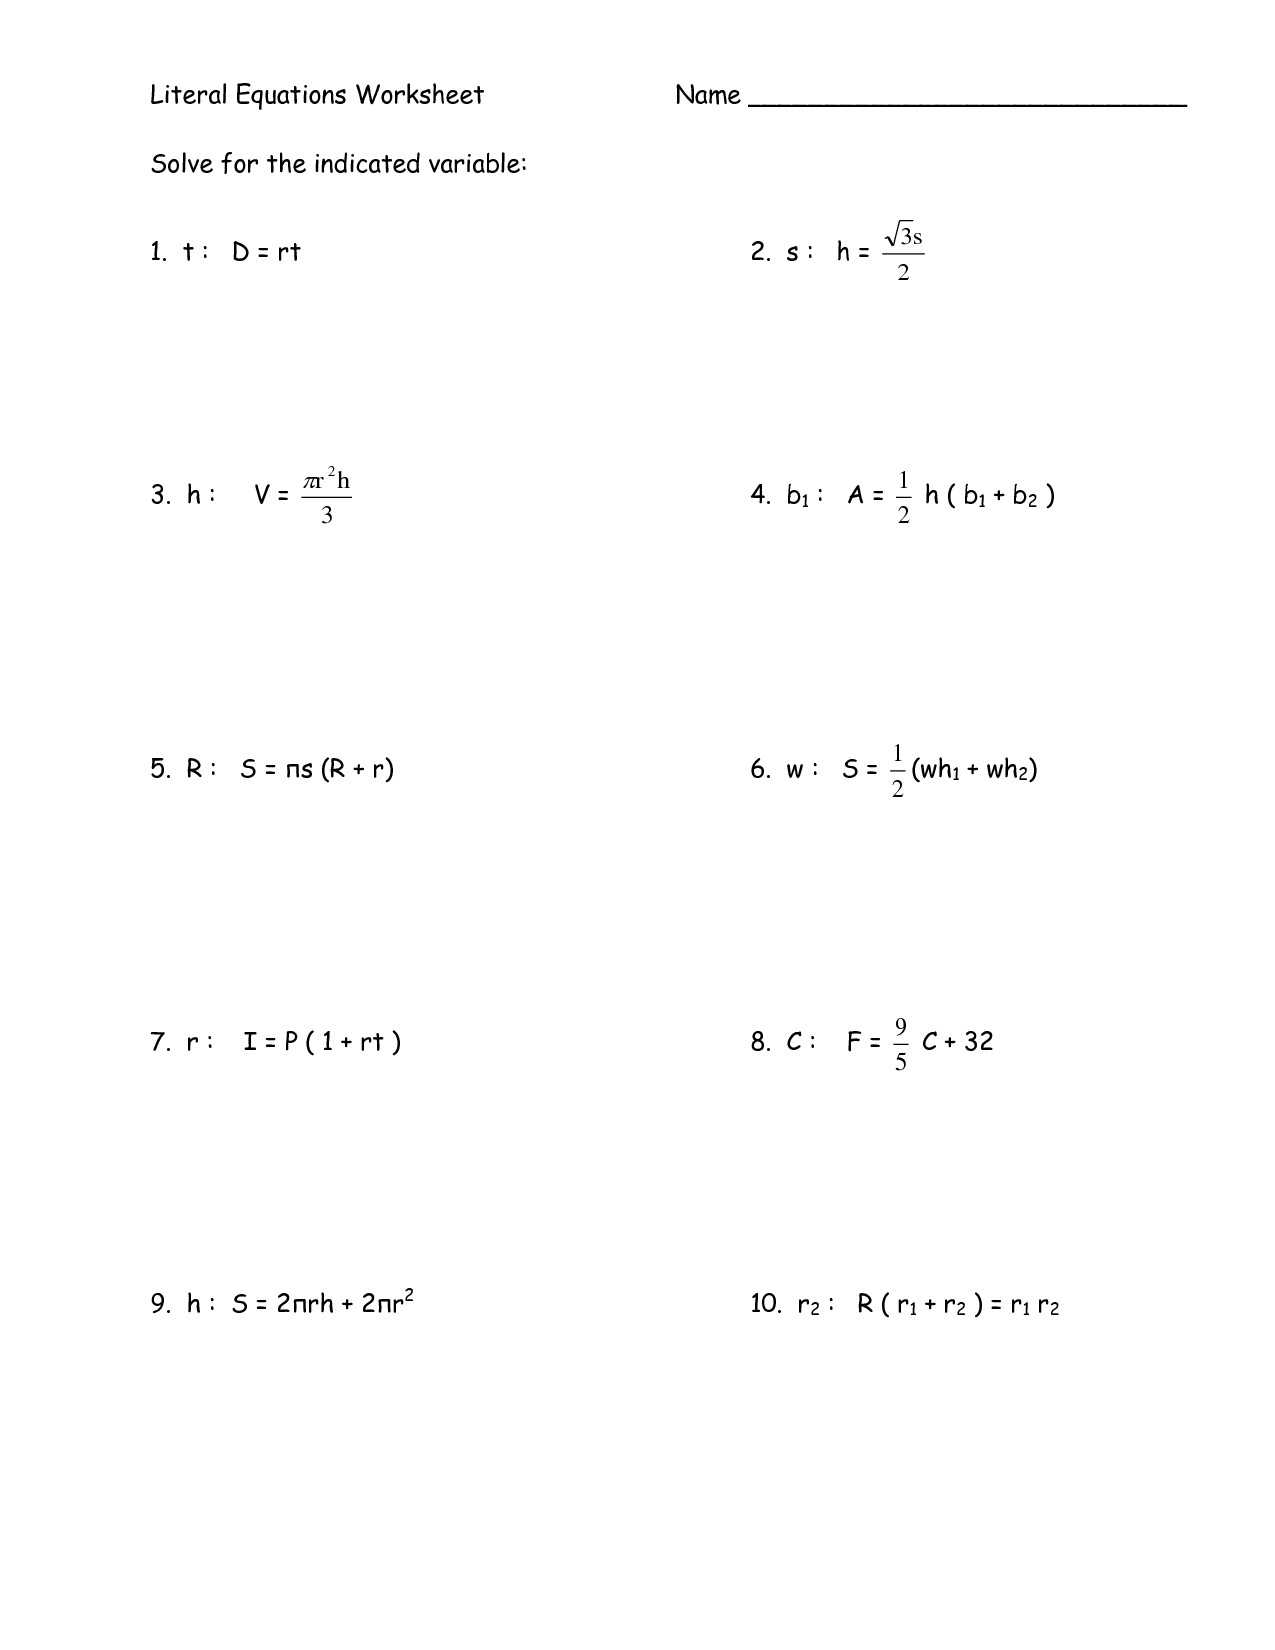 Simple Linear Equations Worksheet Along with solving Systems Equations by Substitution Worksheet Pdf Elegant